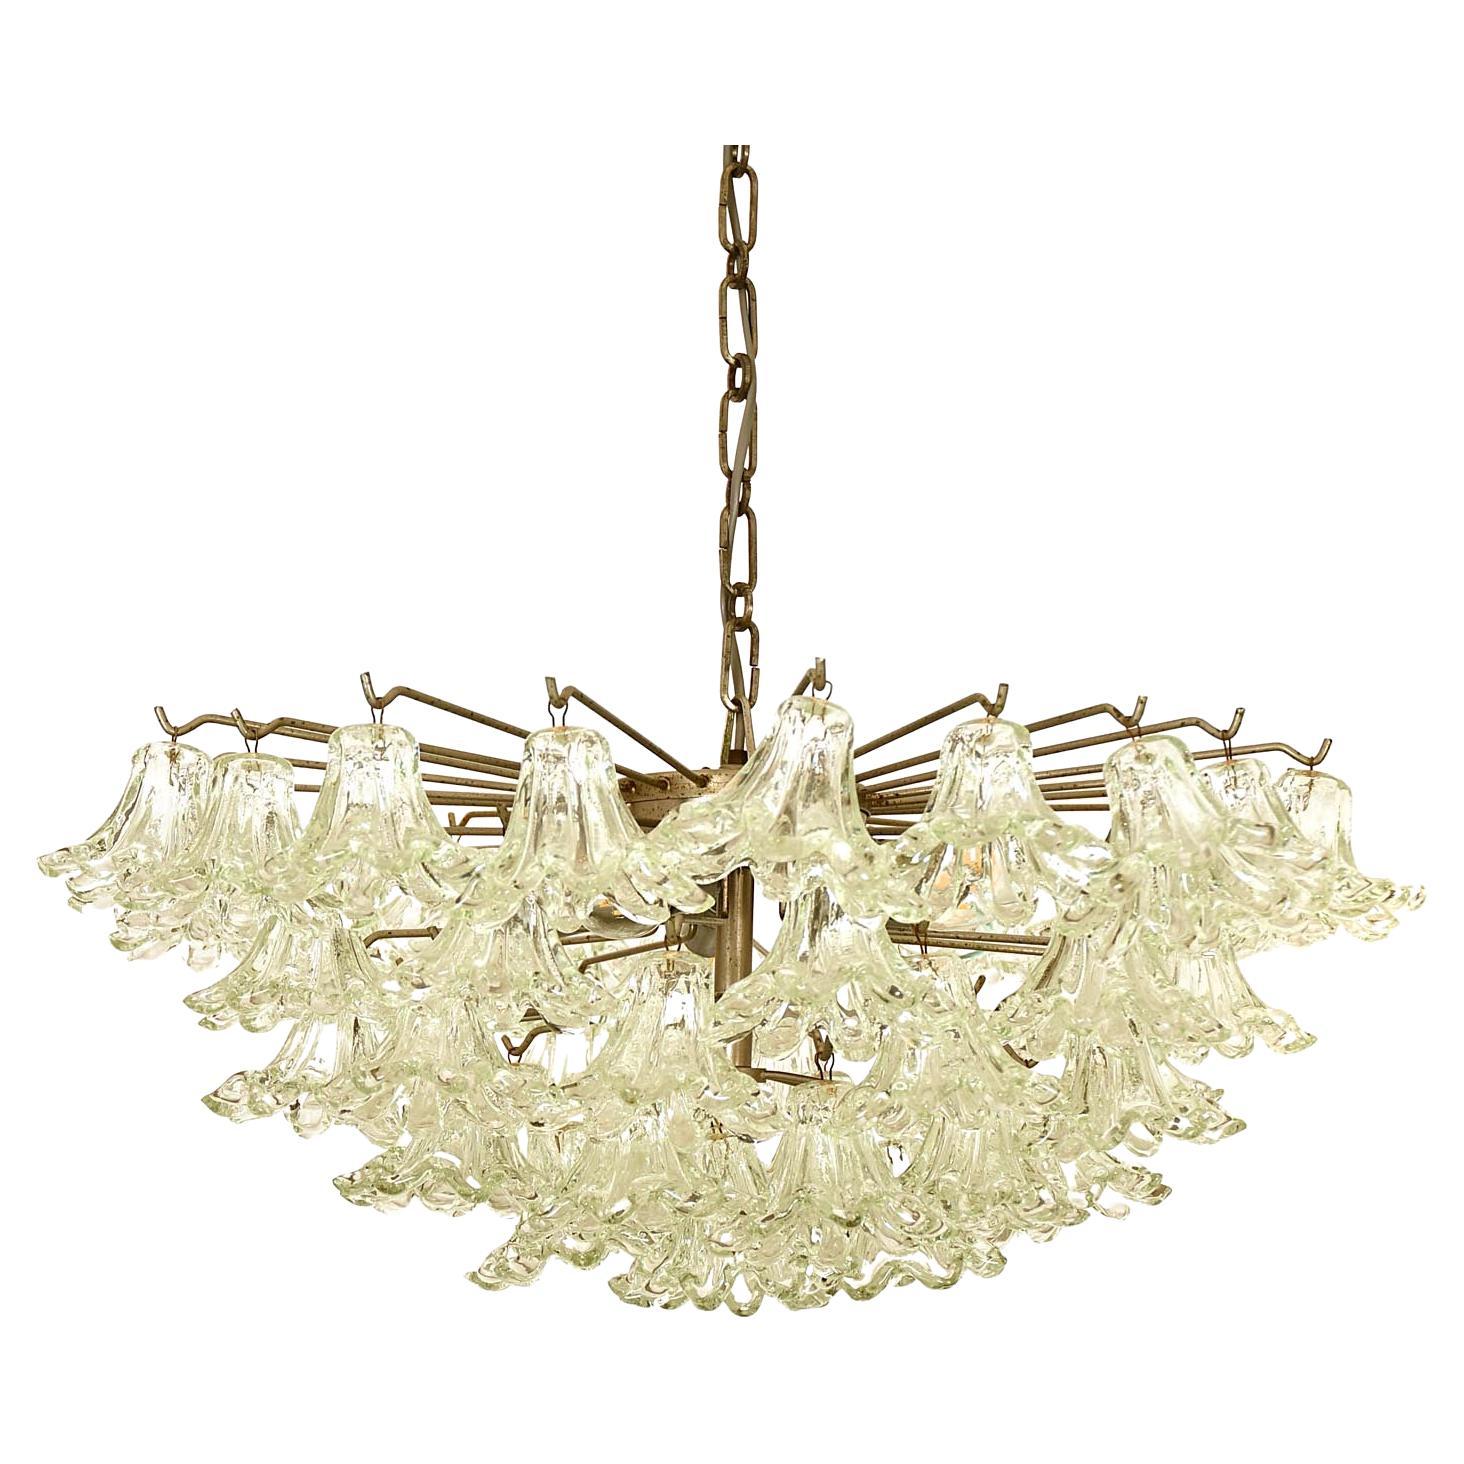 Italian Mid-Century Chandelier with Glass Blossoms, 1955, Murano For Sale